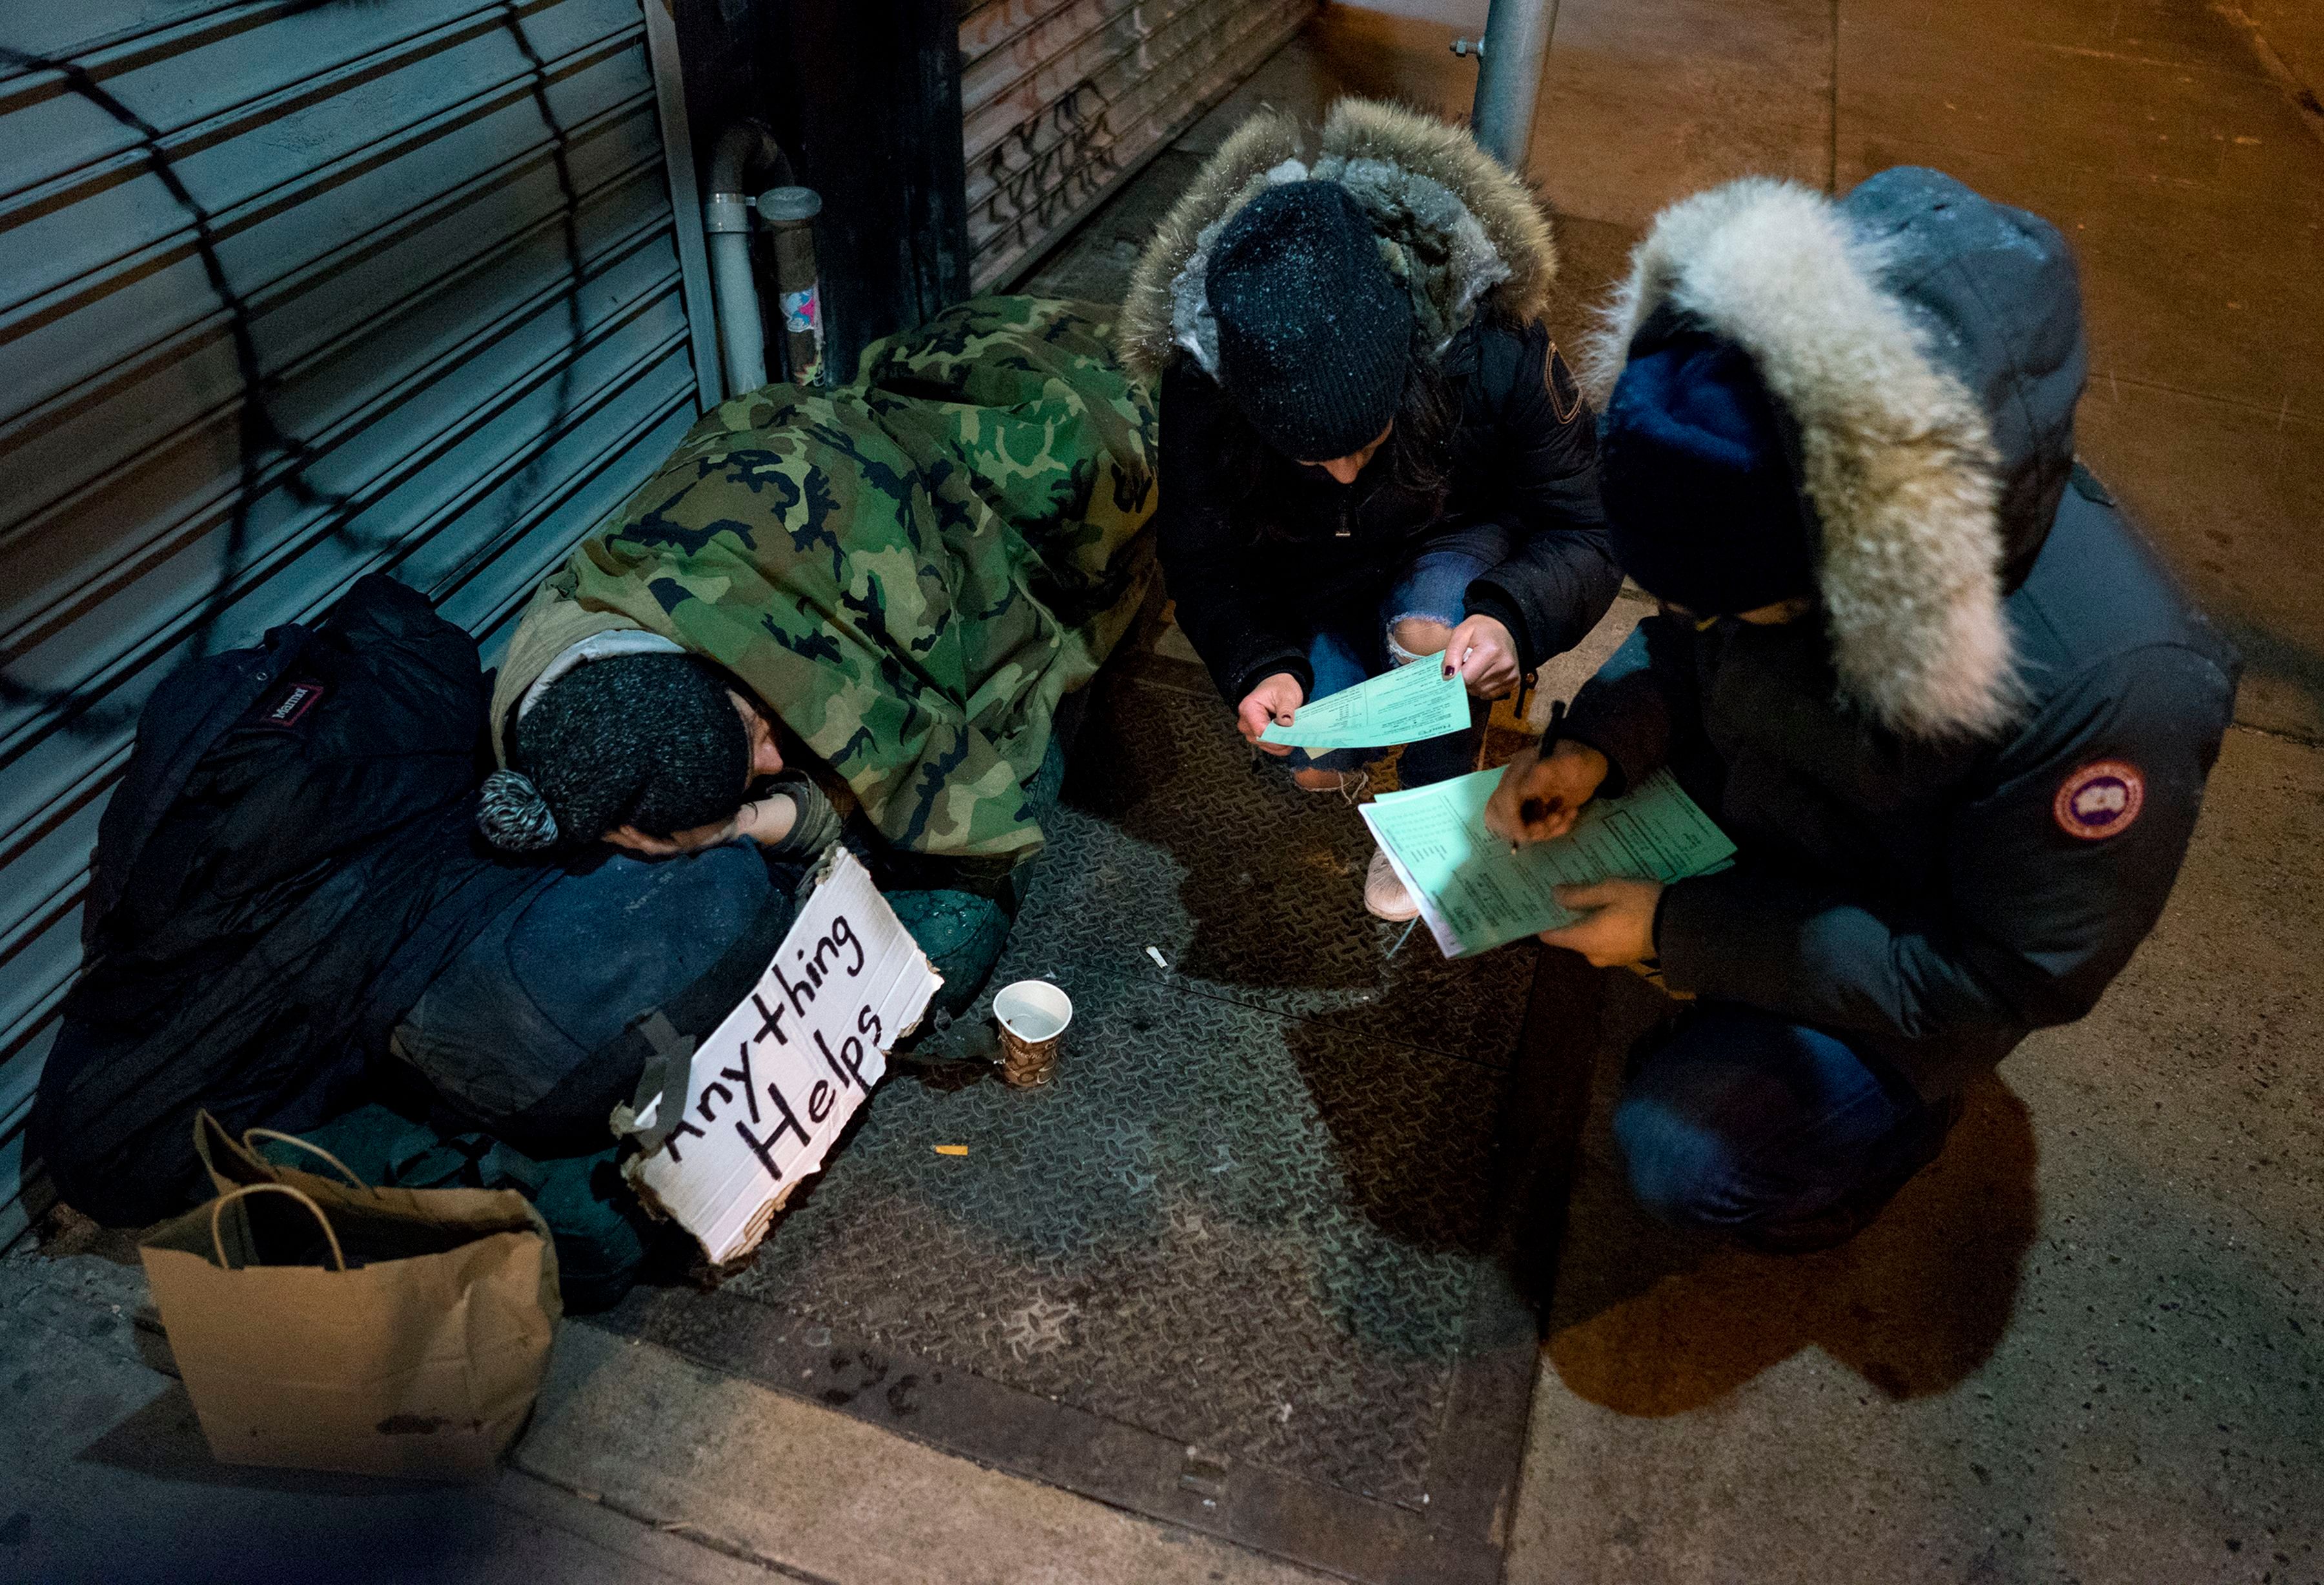 Two people look at forms while kneeling on a sidewalk near a homeless person who is resting under a blanket and next to a sign that says "Anything helps" and a donation cup